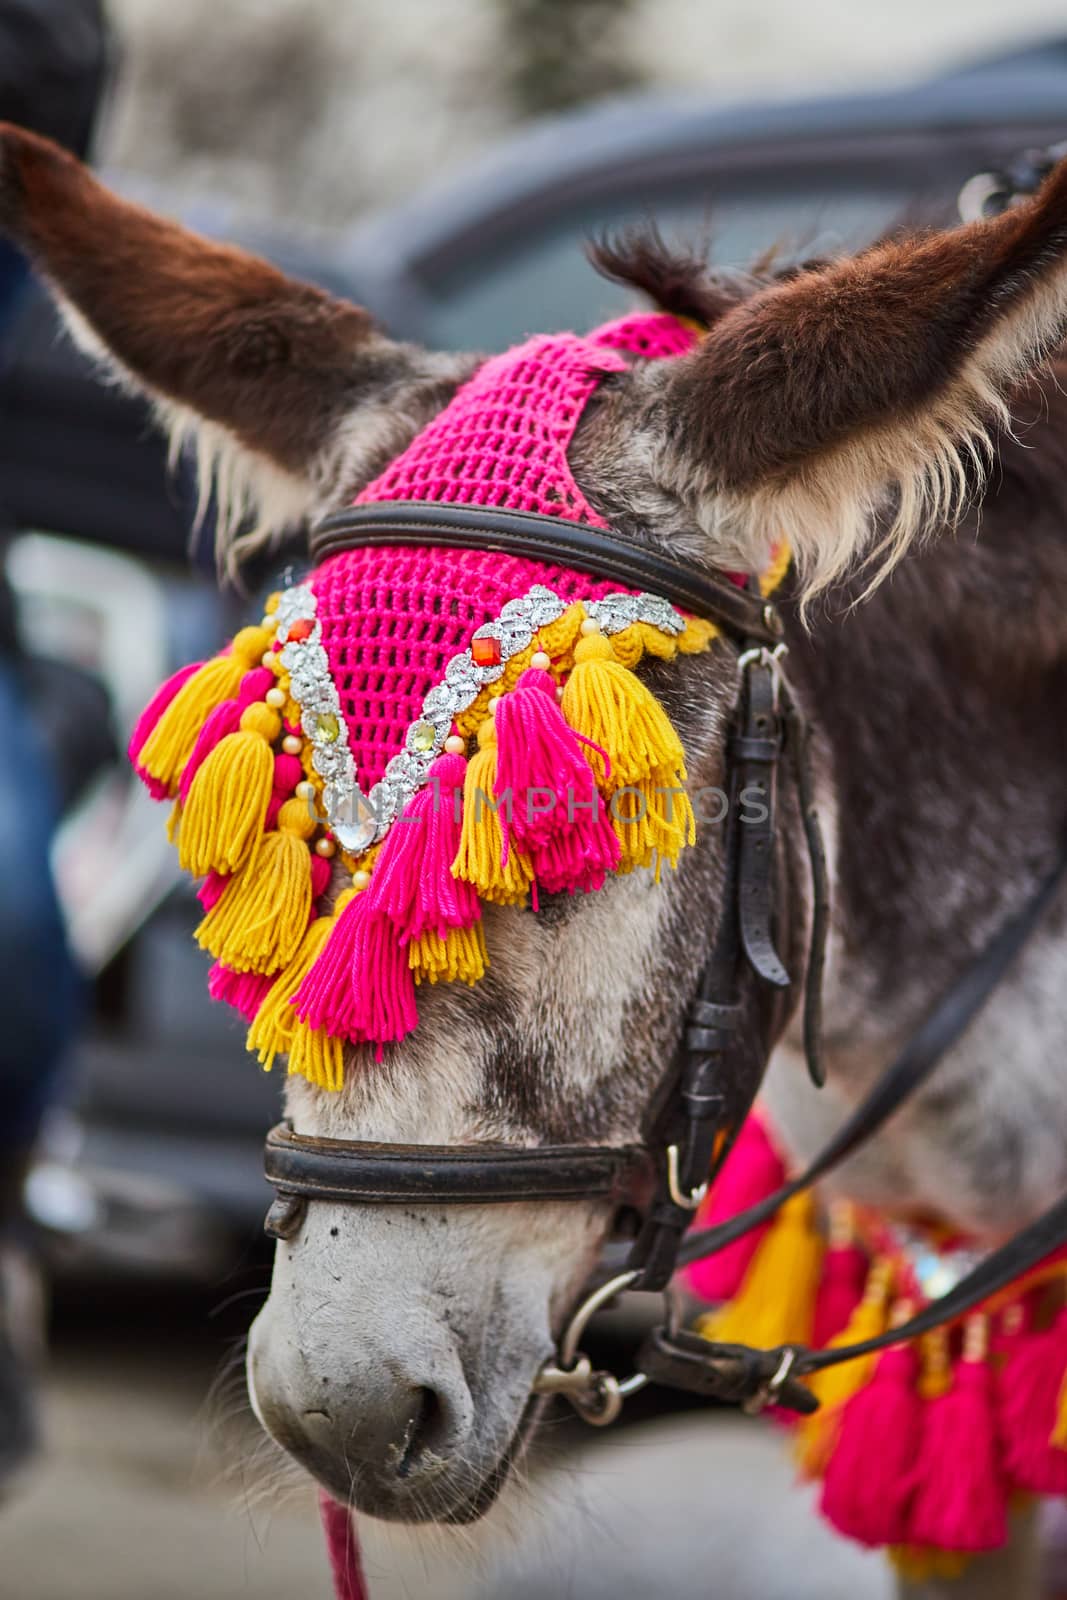 Decorated donkey in Moscows amusement park photo by rasika108